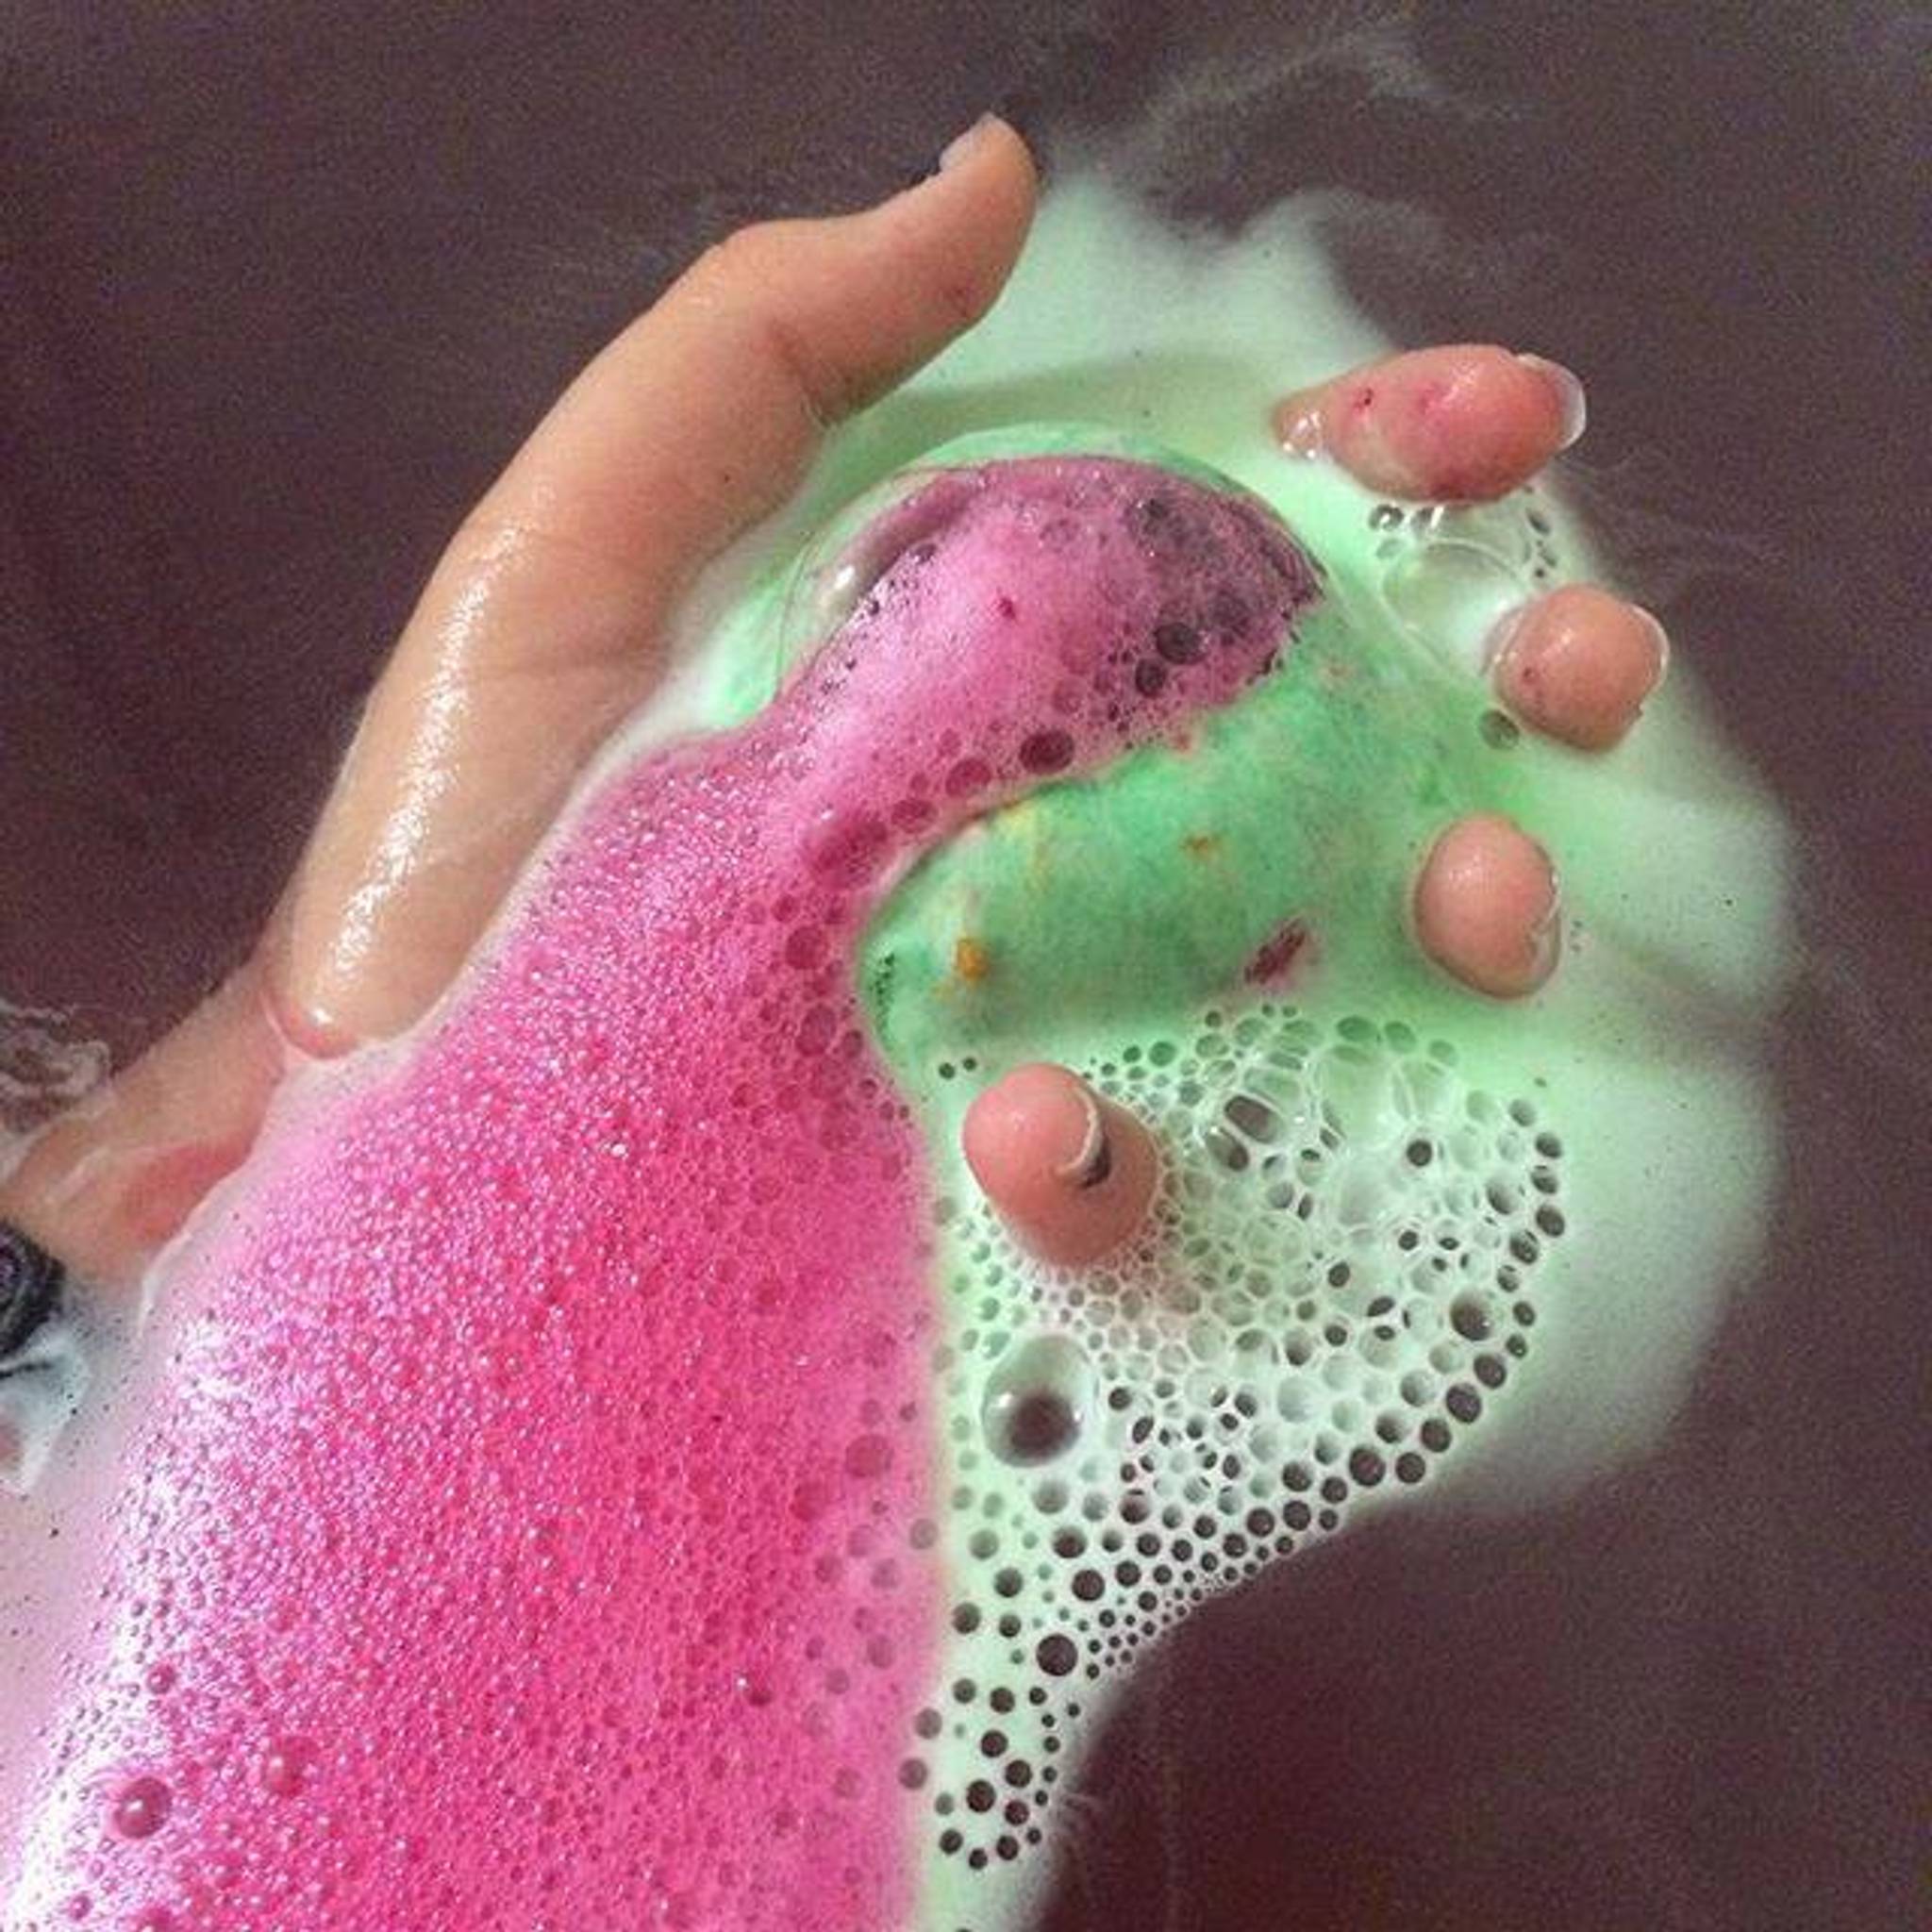 The internet is obsessed with Lush Bath Bombs